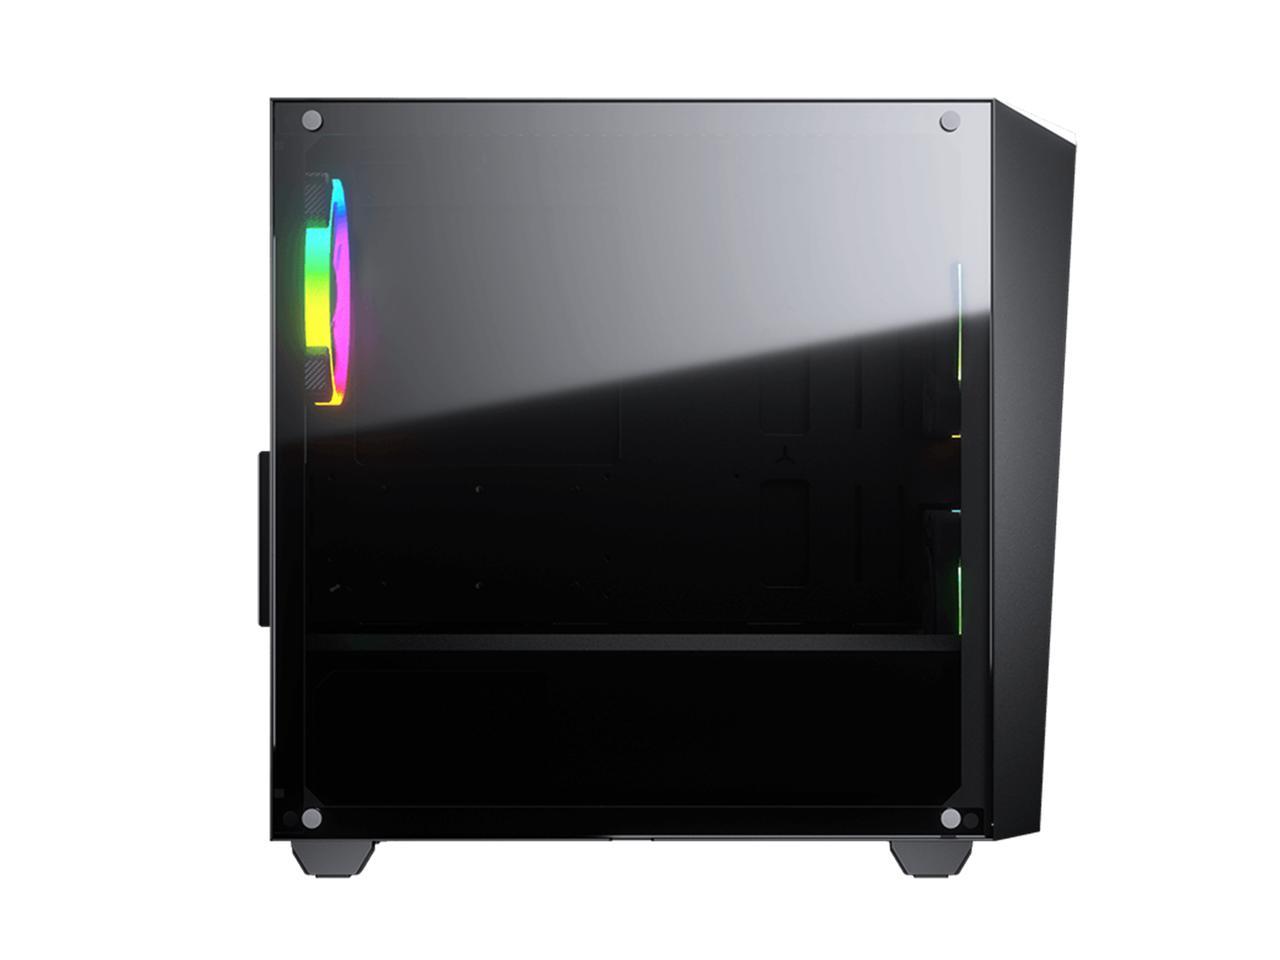 COUGAR MG120-G RGB Black Compact RGB Mini Tower Case with Tempered Glass Side Window